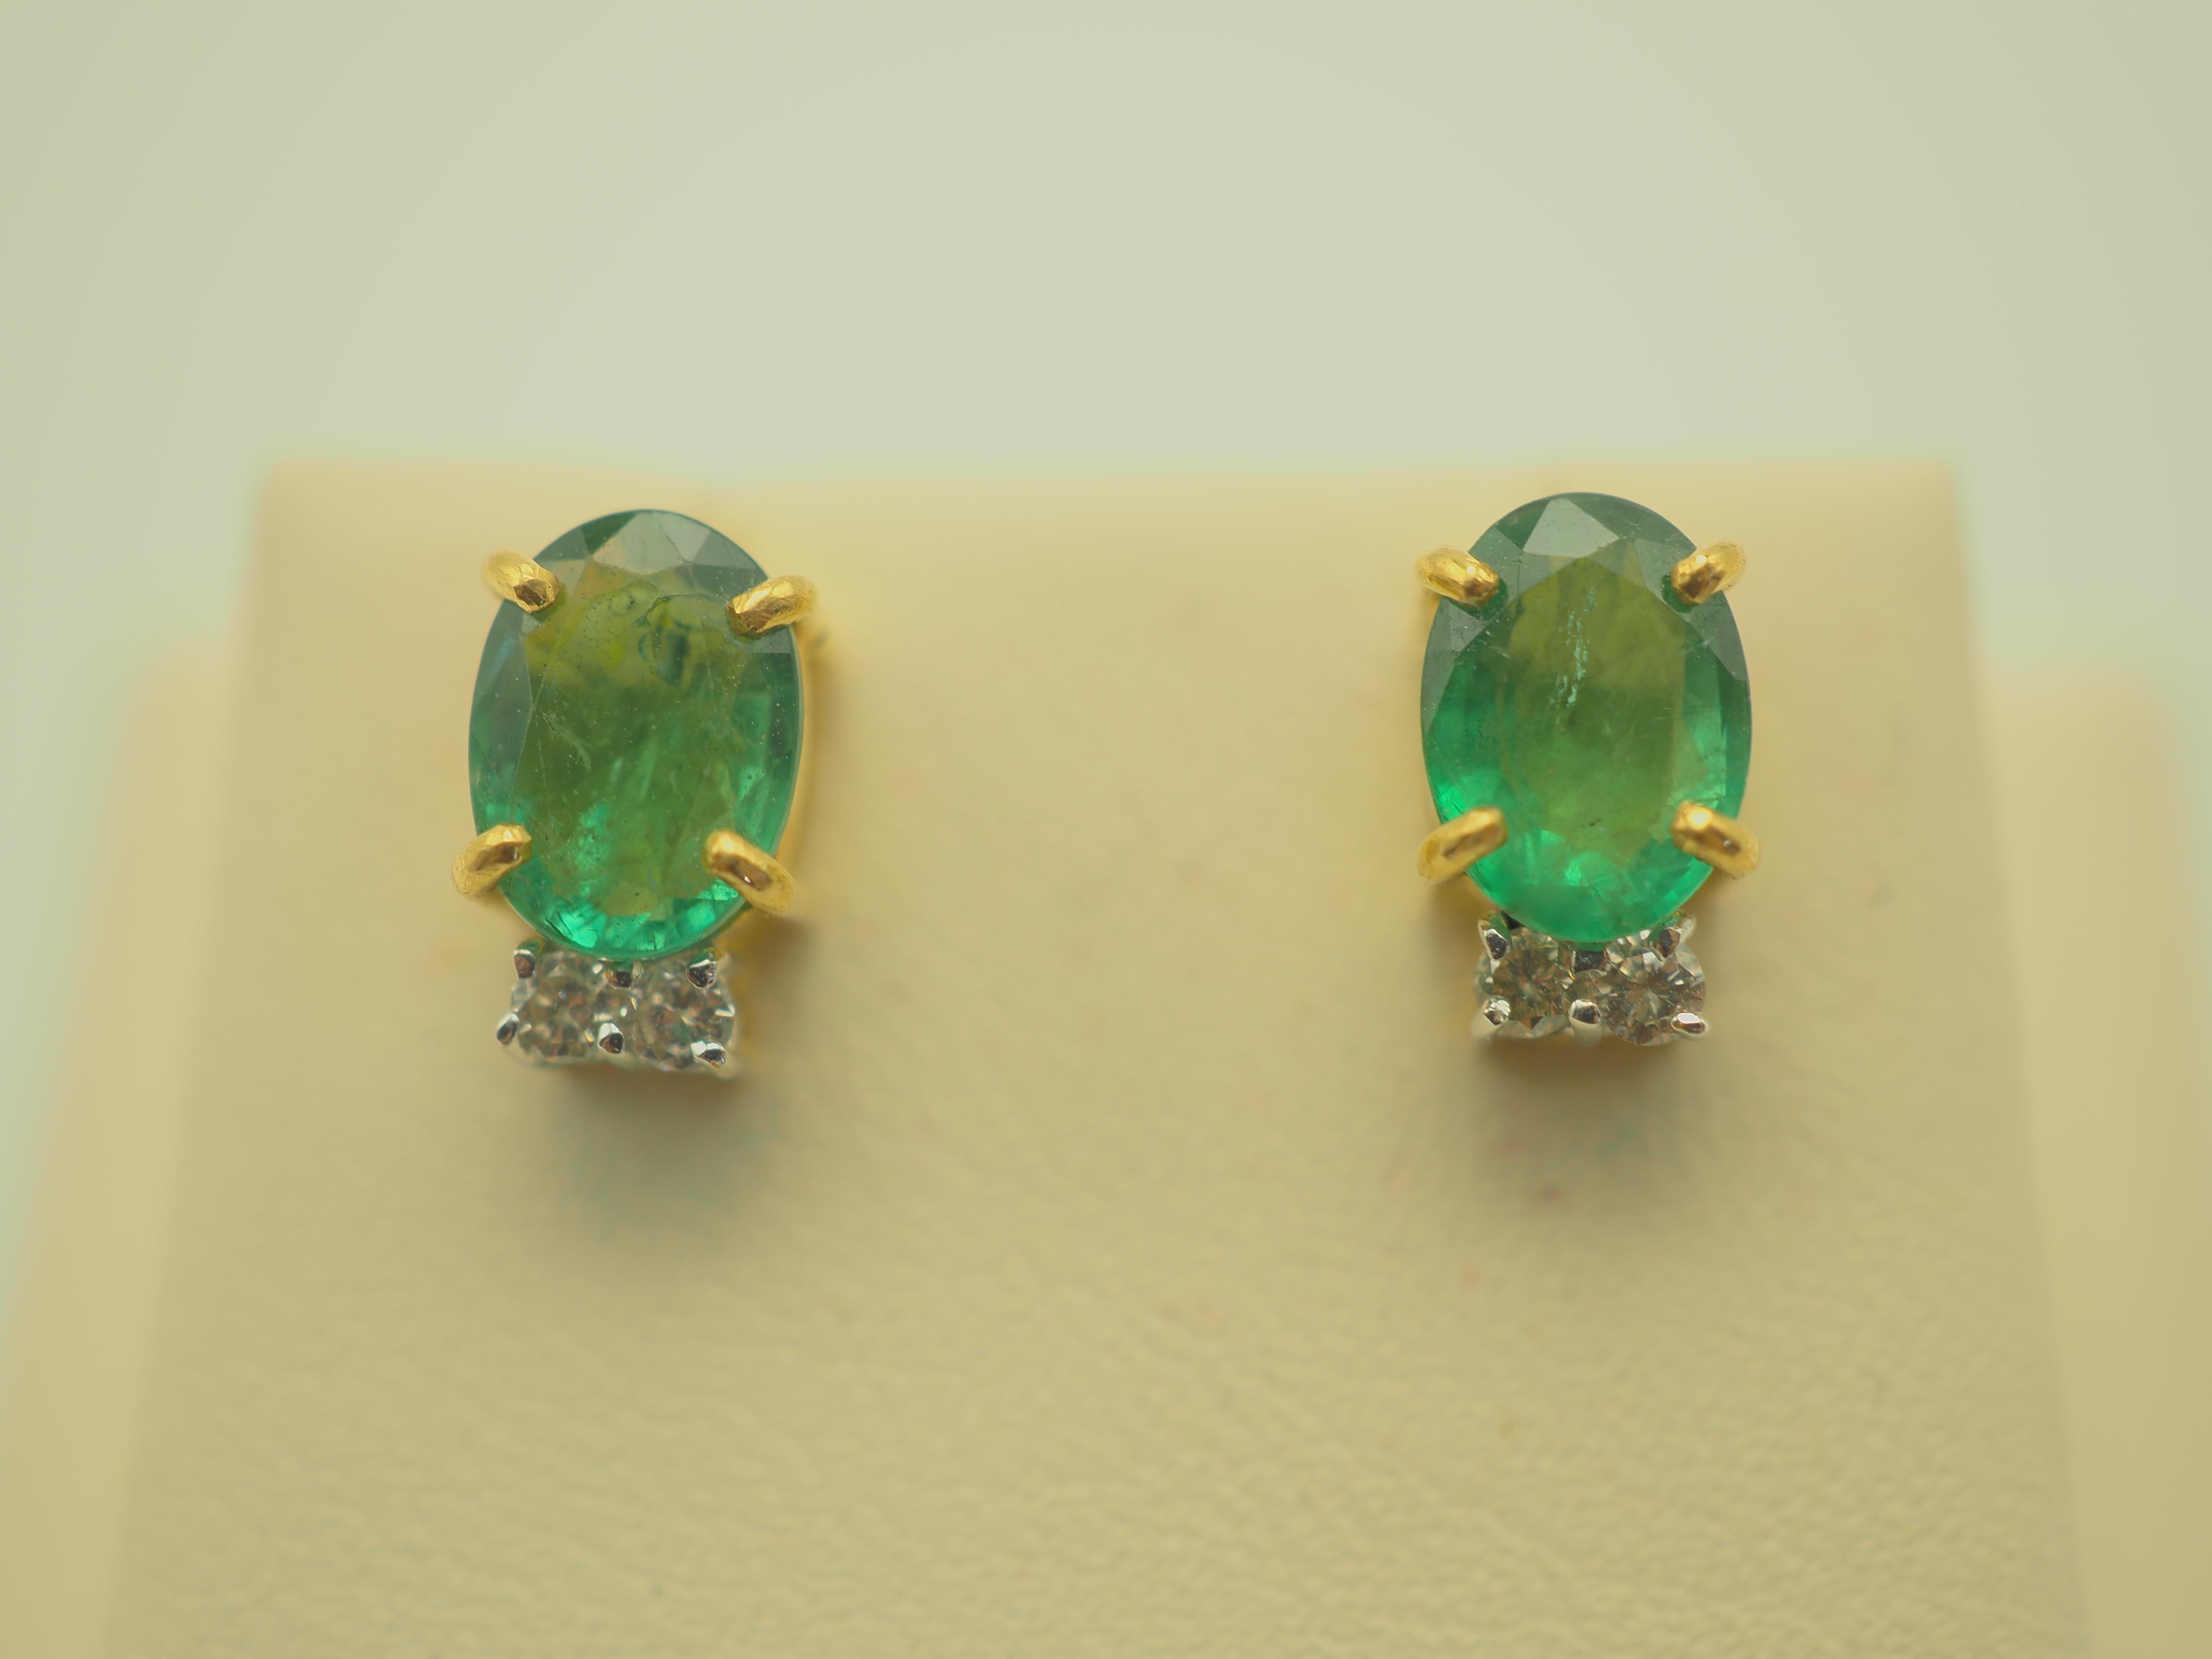 Lovely emerald and diamond stud earrings for wear during special occasions. The oval emeralds are of bright grassy green color with natural inclusions. The four diamonds are lively with white color and eye clean which adds to the beauty of the